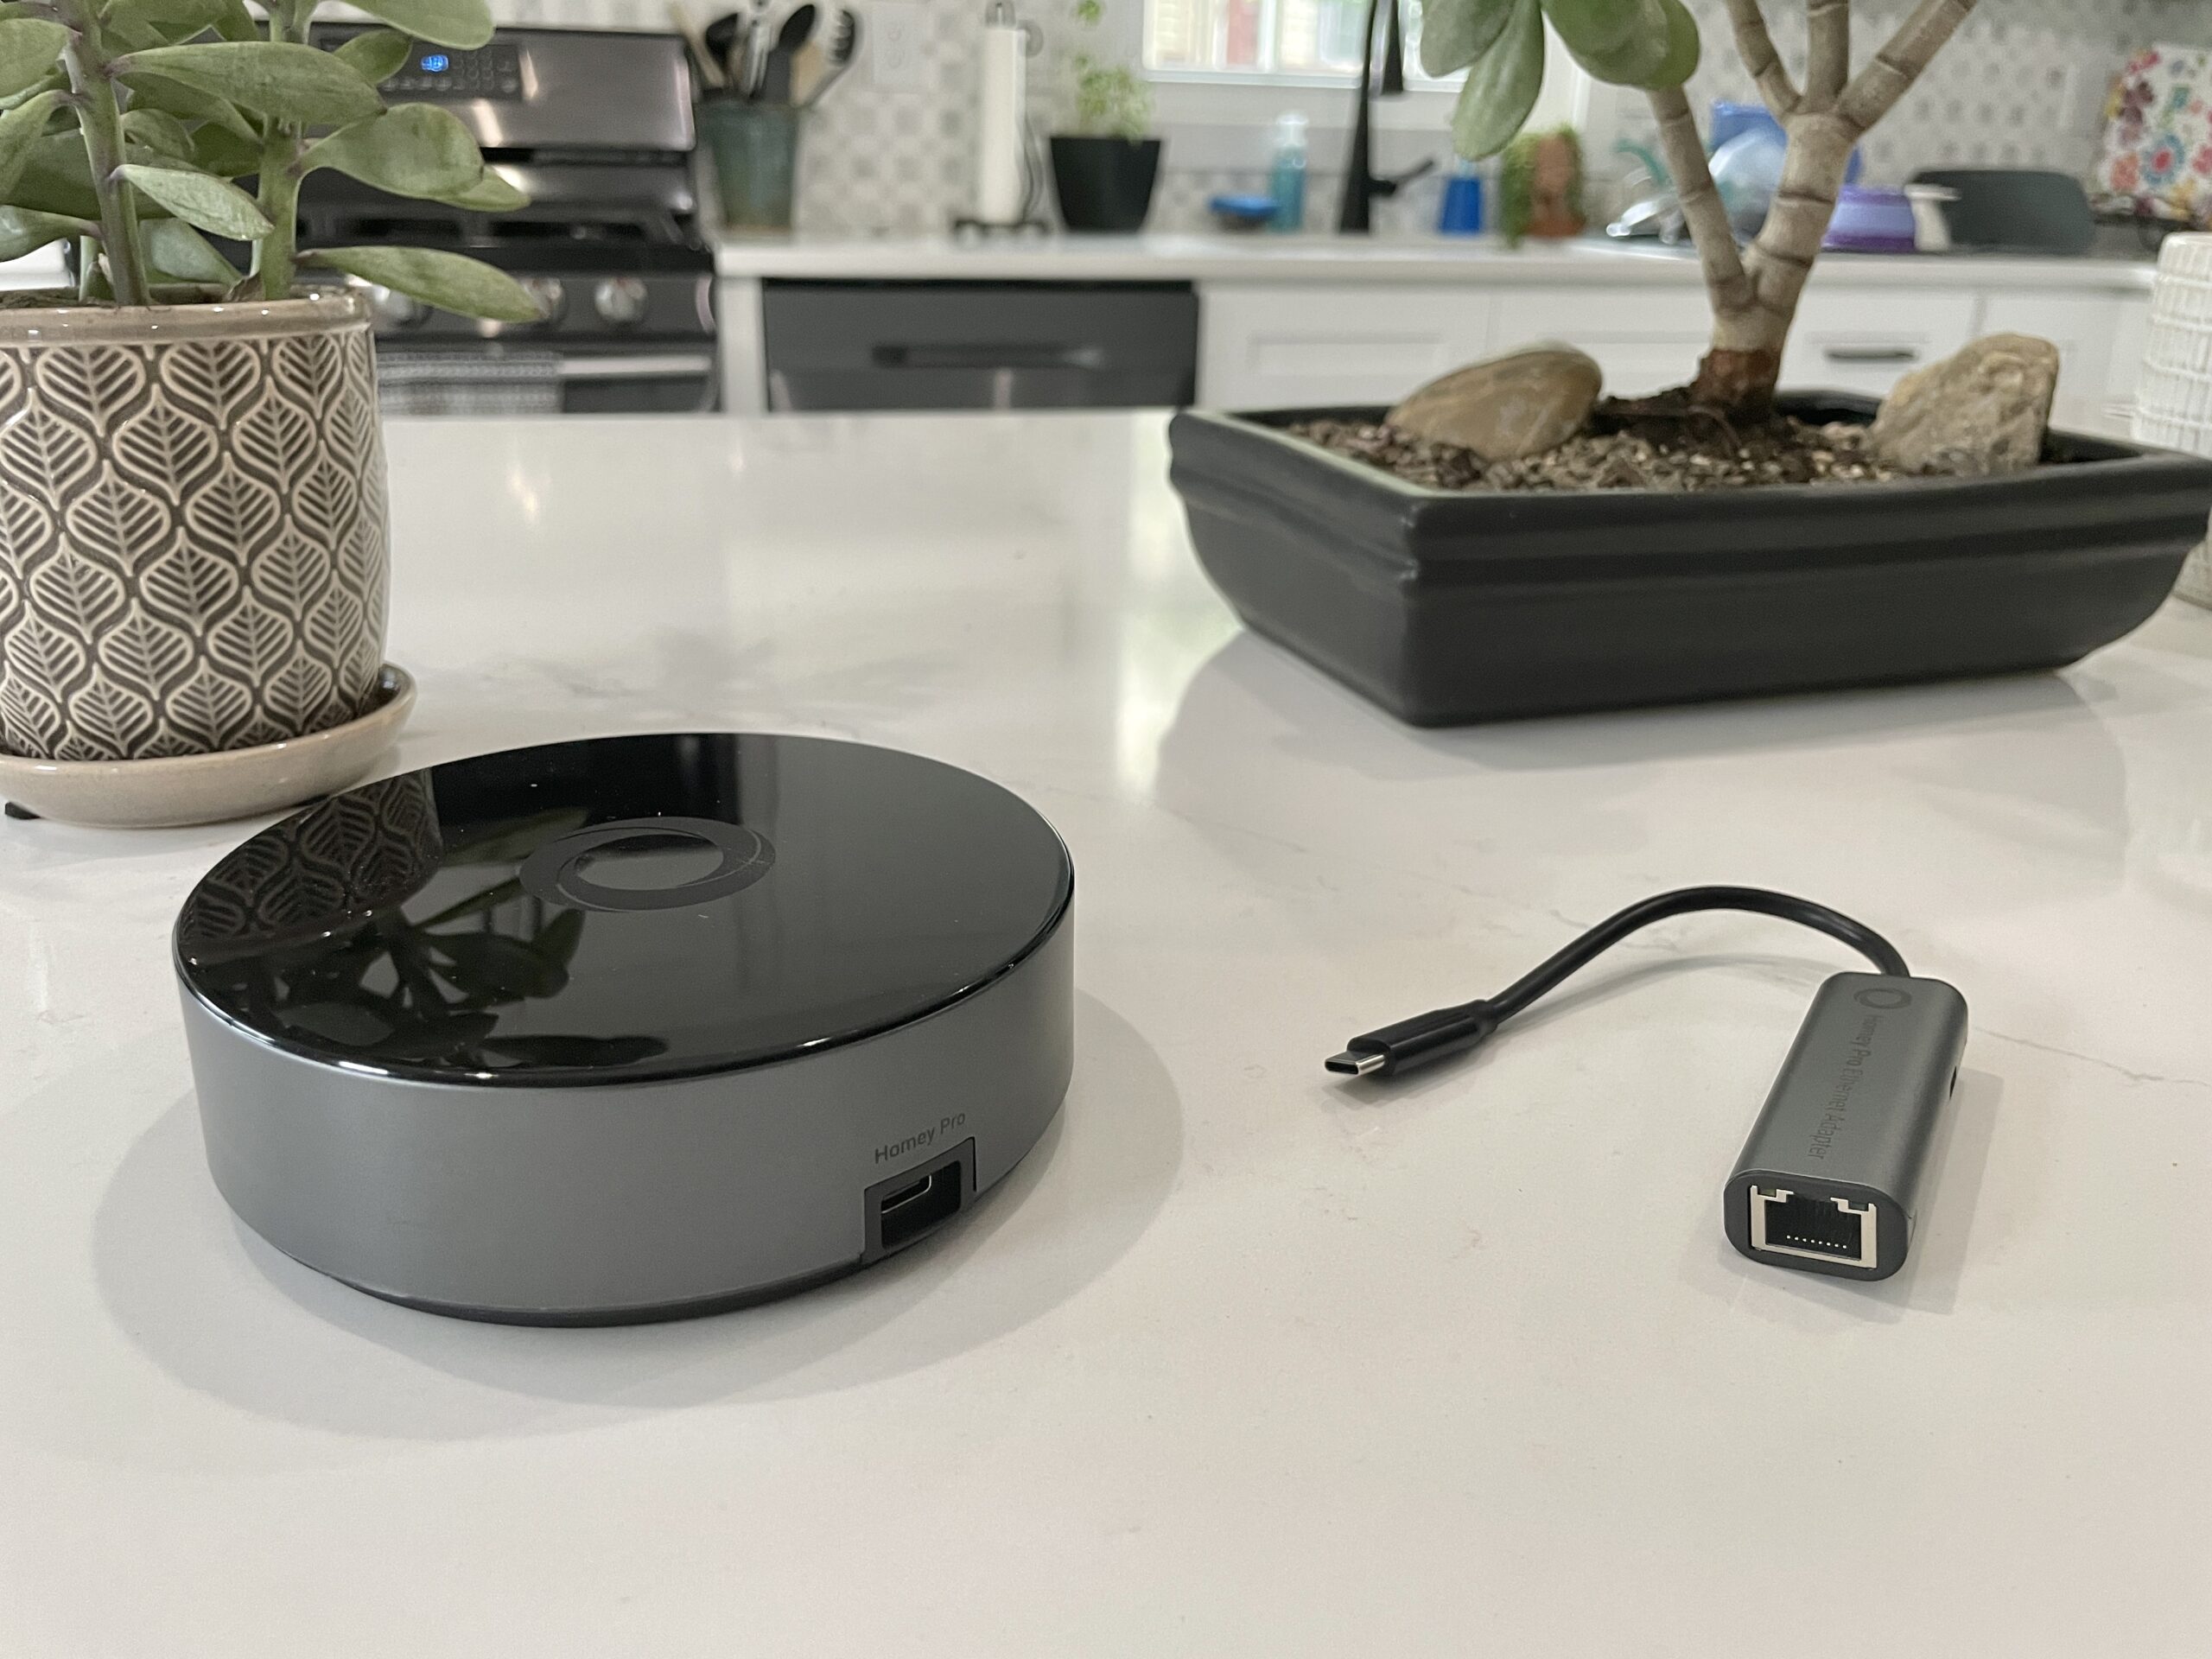 Homey Pro review: Great potential but check device support - Stacey on IoT